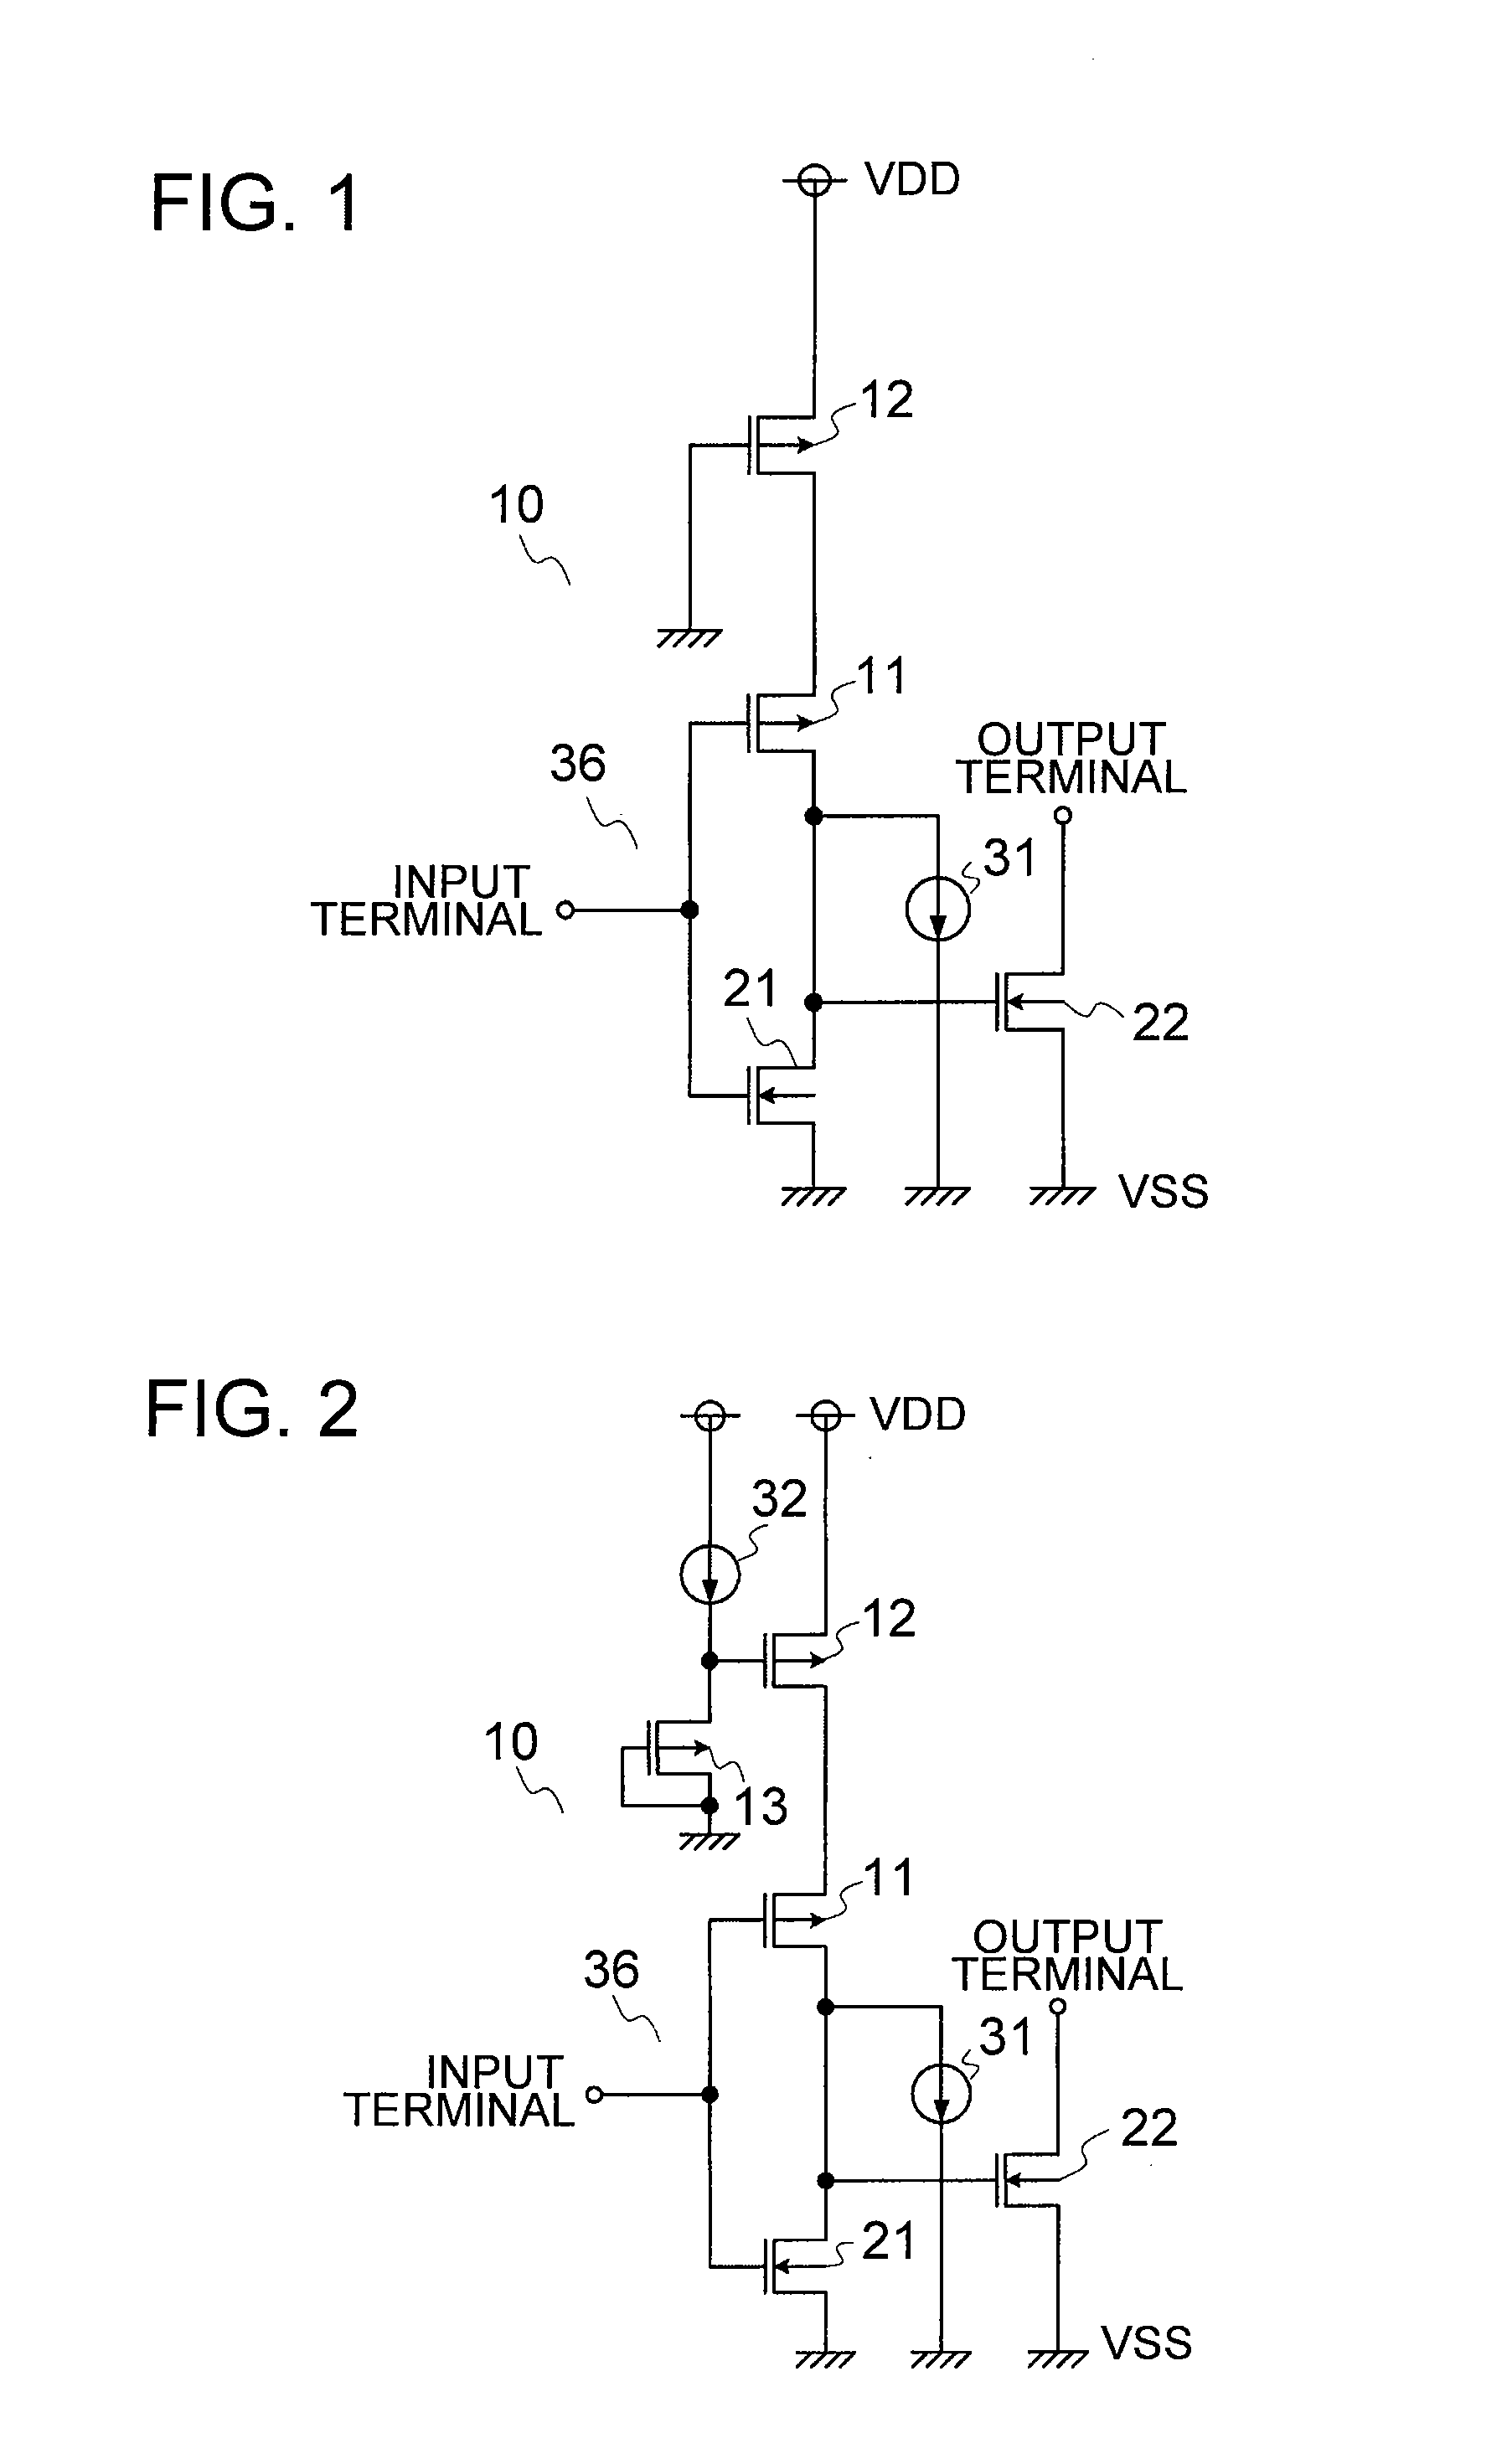 Output circuit, temperature switch ic, and battery pack